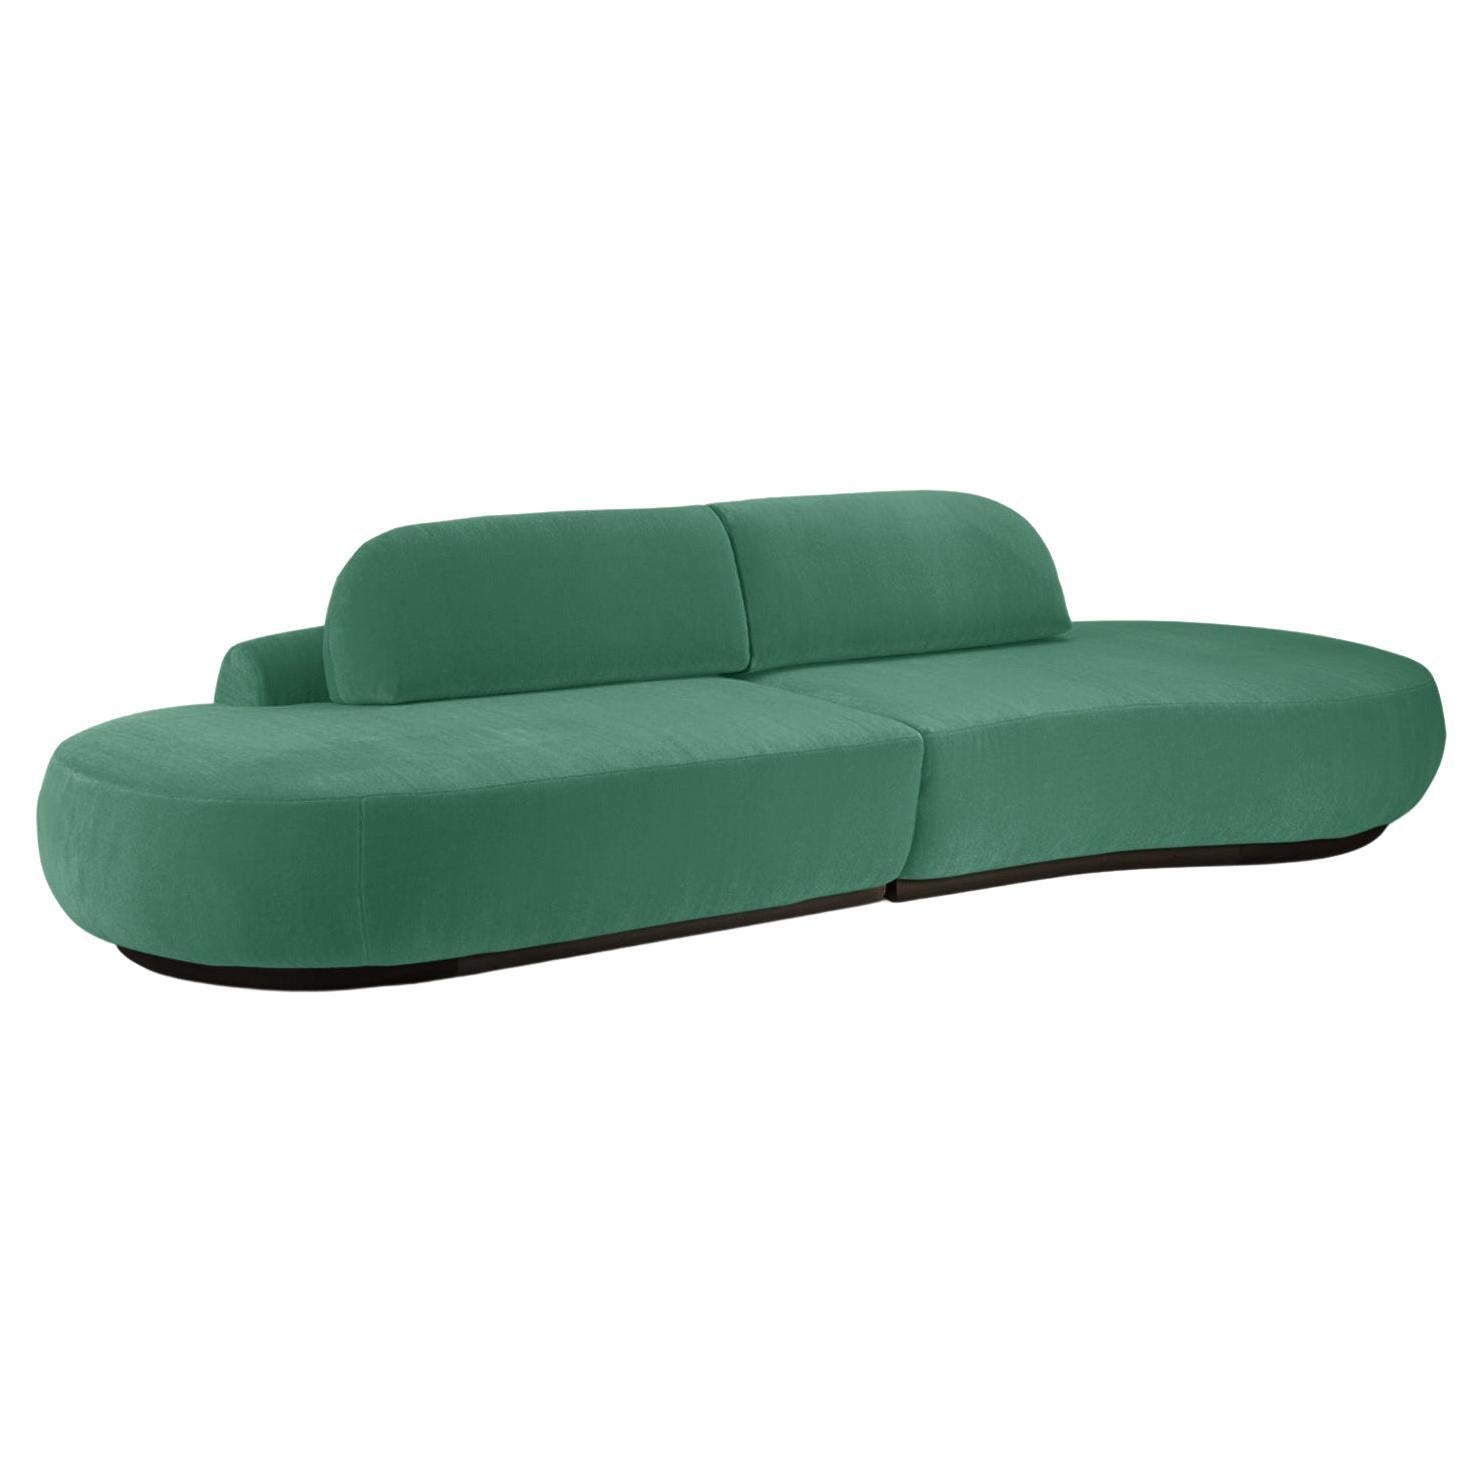 Naked Curved Sectional Sofa, 2 Piece with Beech Ash-056-5 and Paris Green For Sale